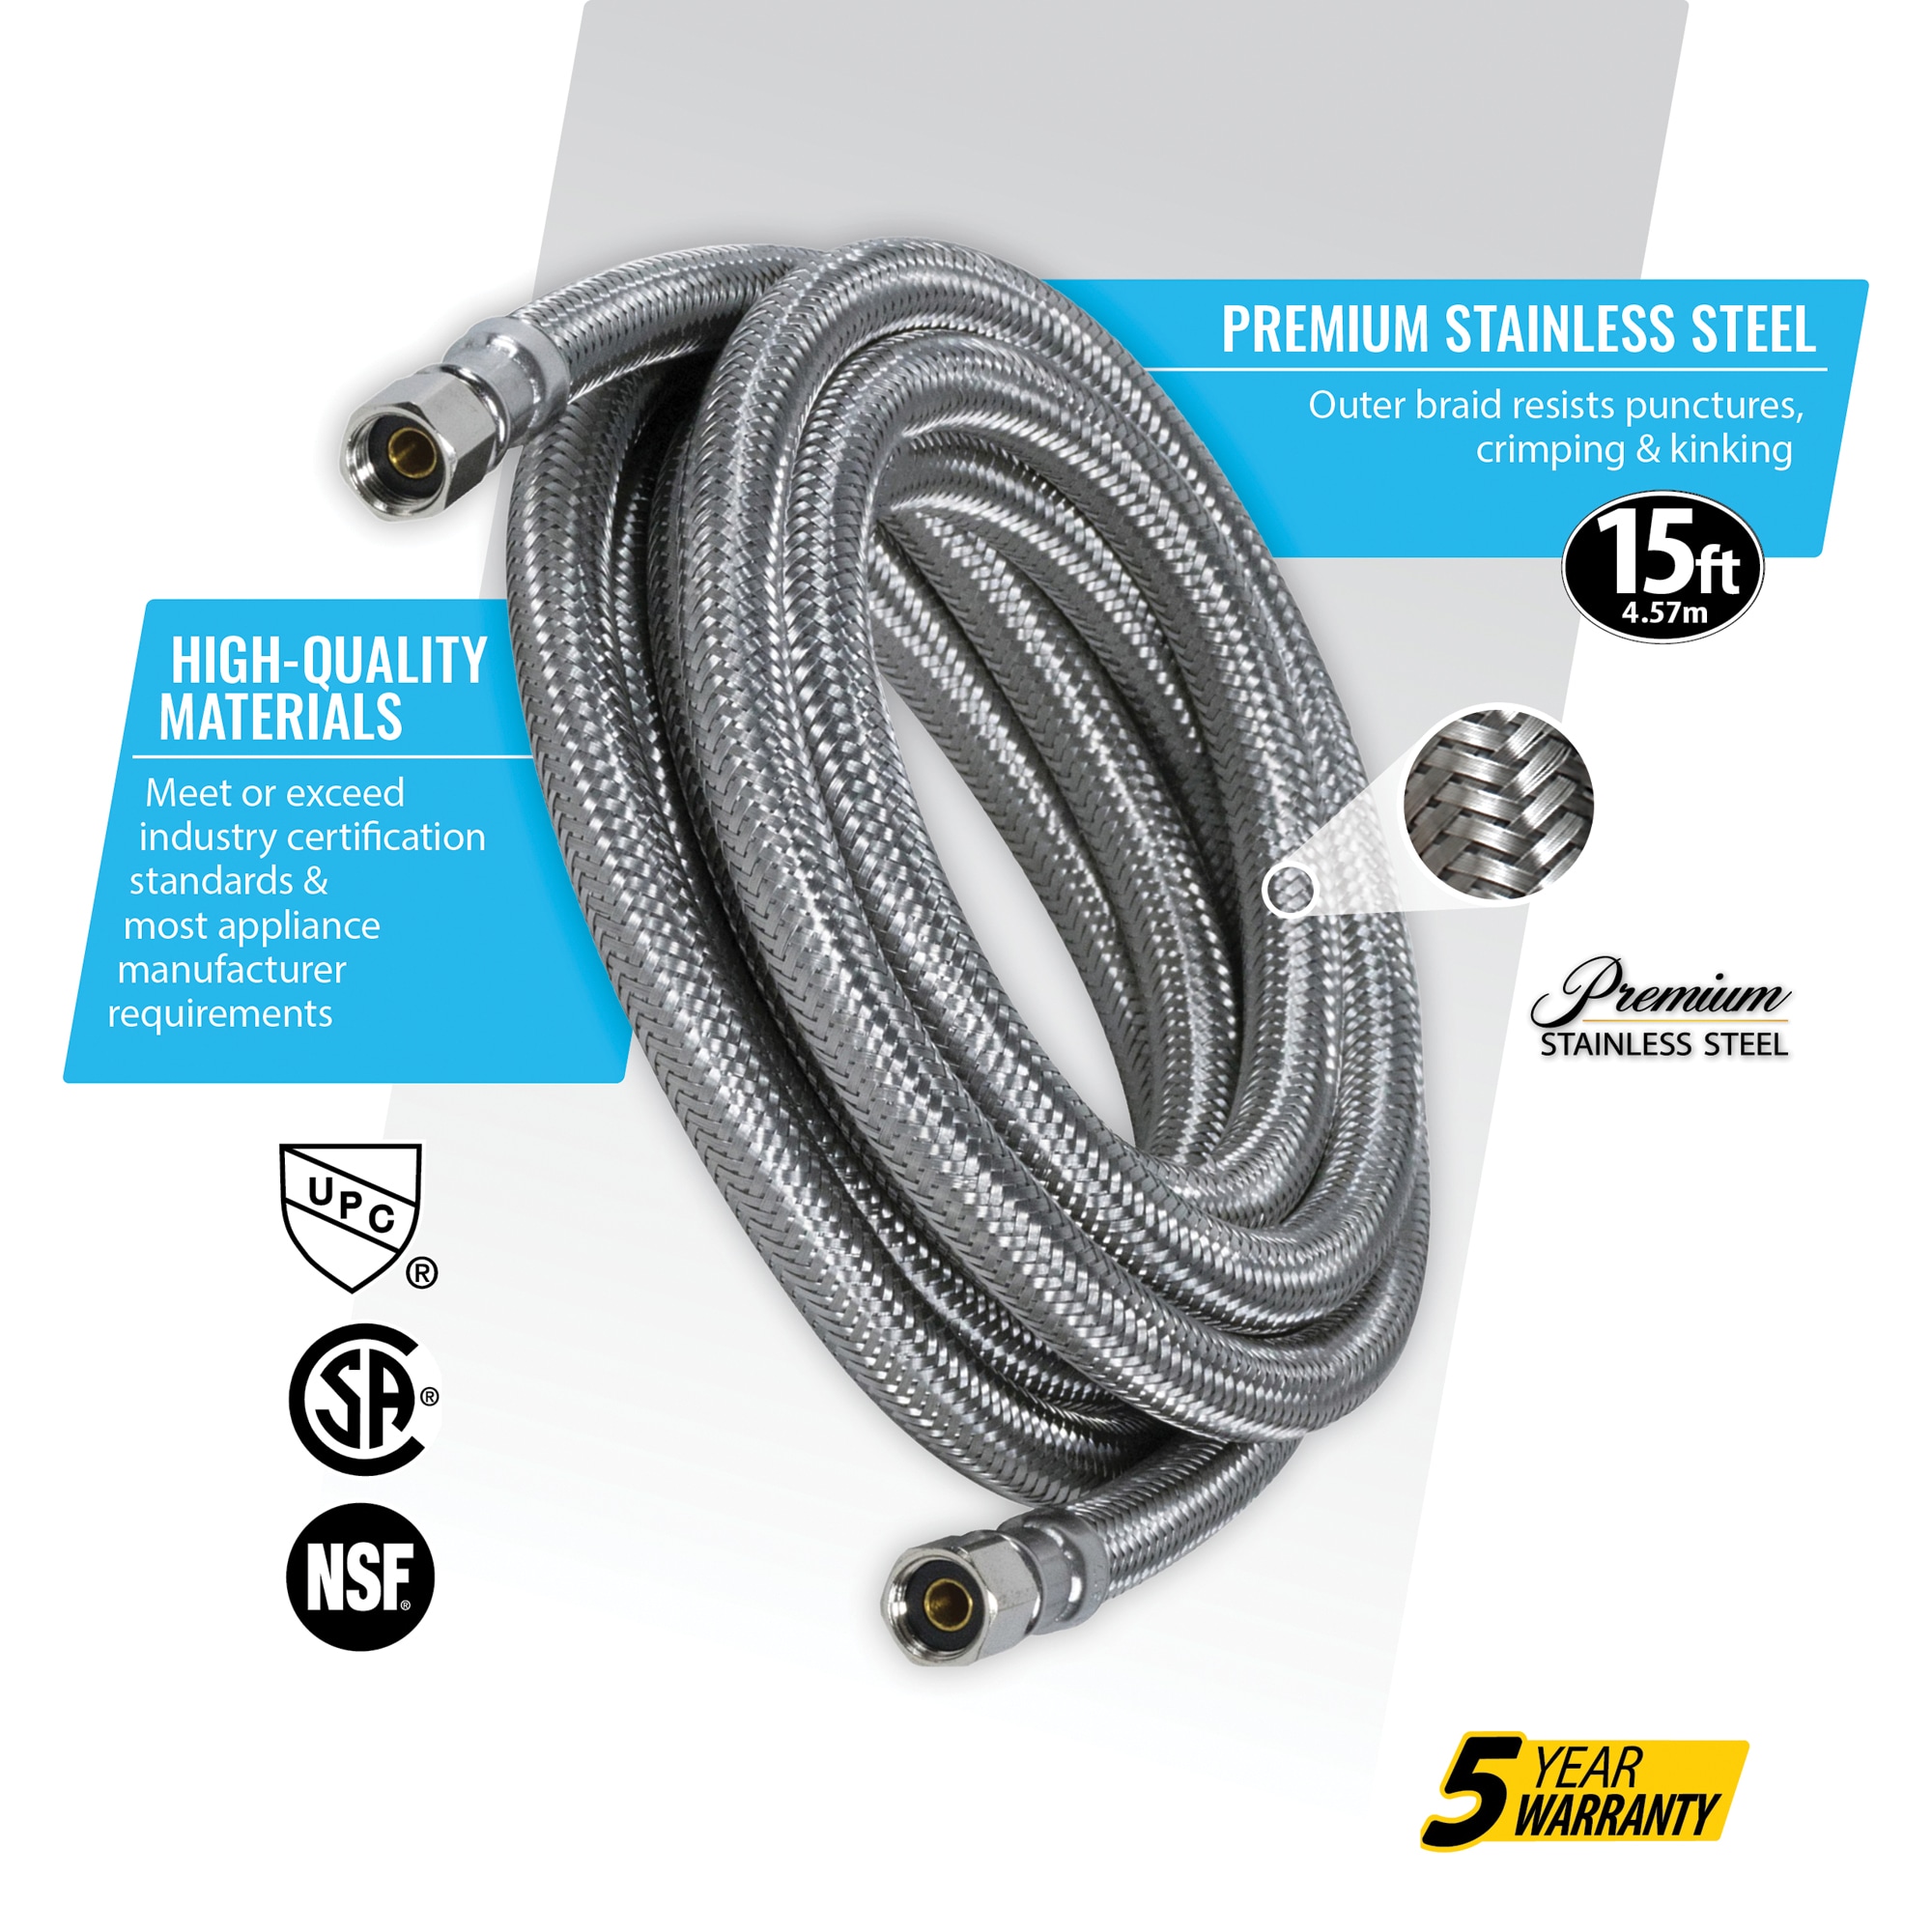 Everflow Supplies 2668-nl Lead Free Stainless Steel Braided Ice Maker Supply Line with Two 1/4 inch Fittings on Both Ends, 96 inch, Other